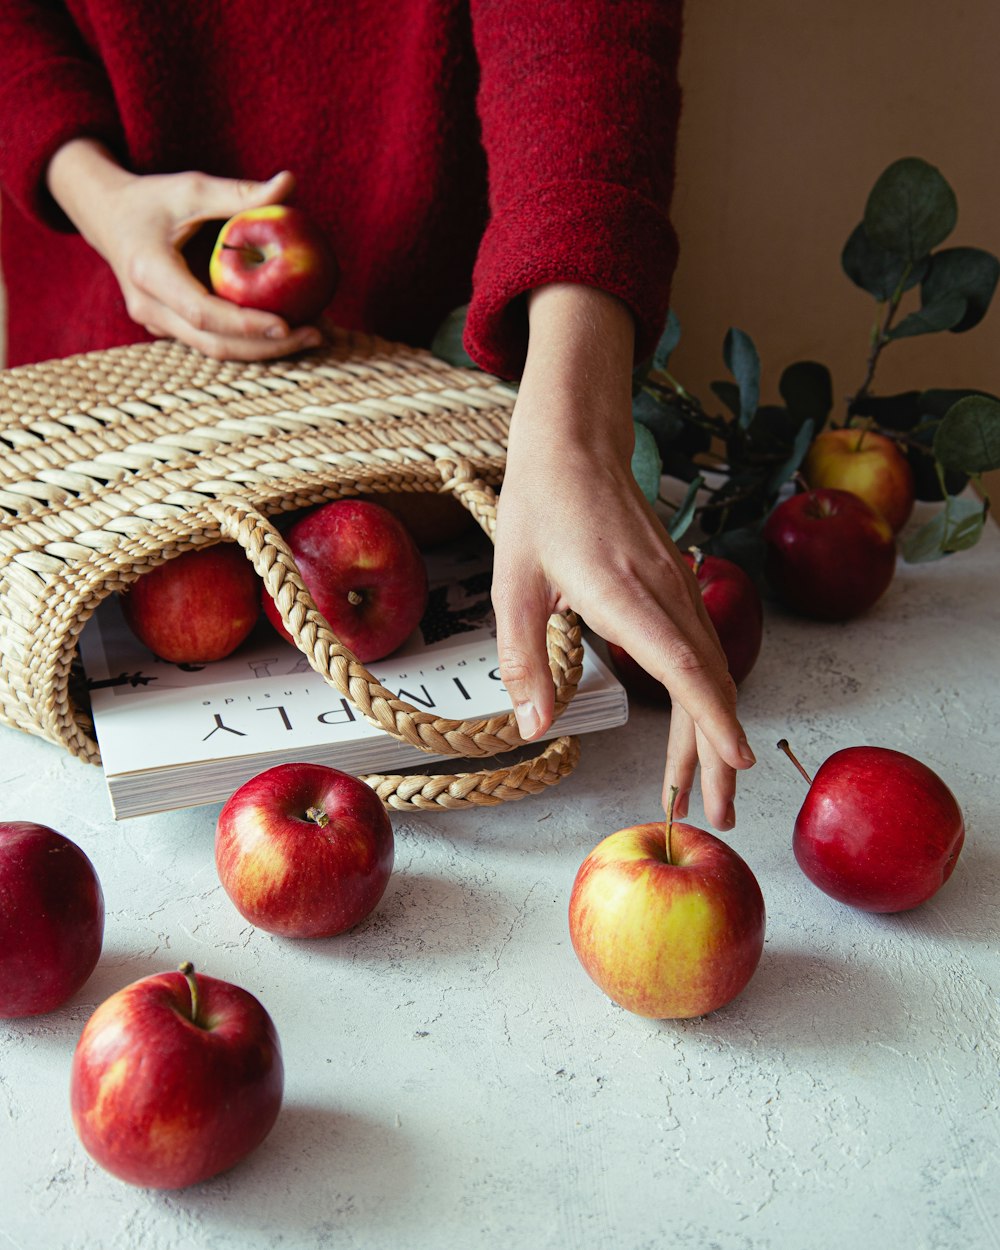 a person picking apples from a basket on a table